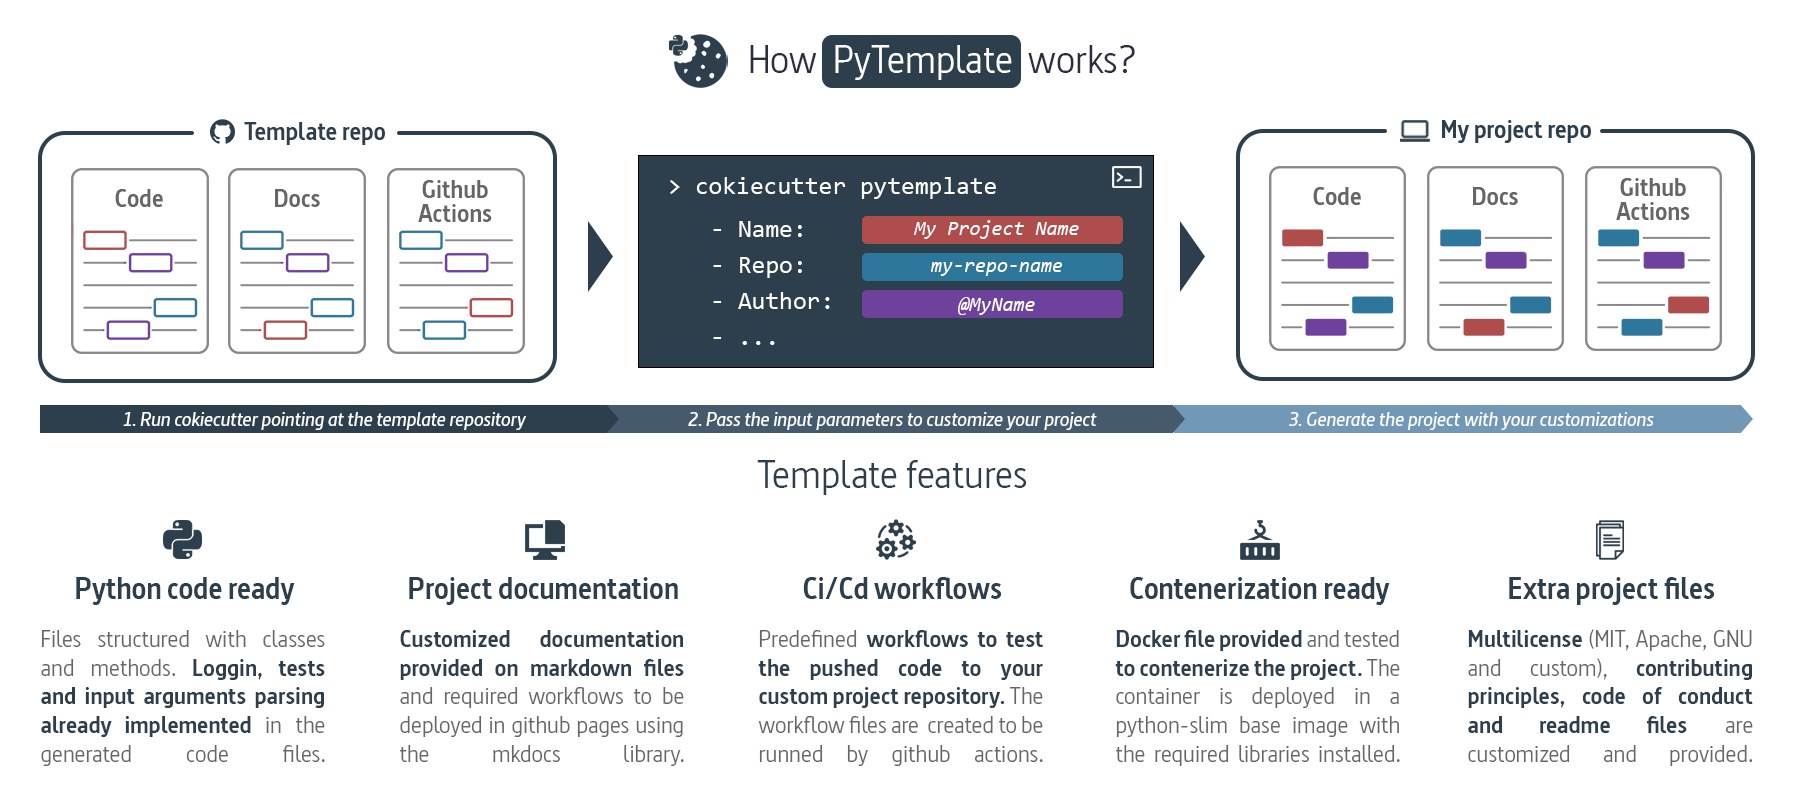 How PyTemplate works